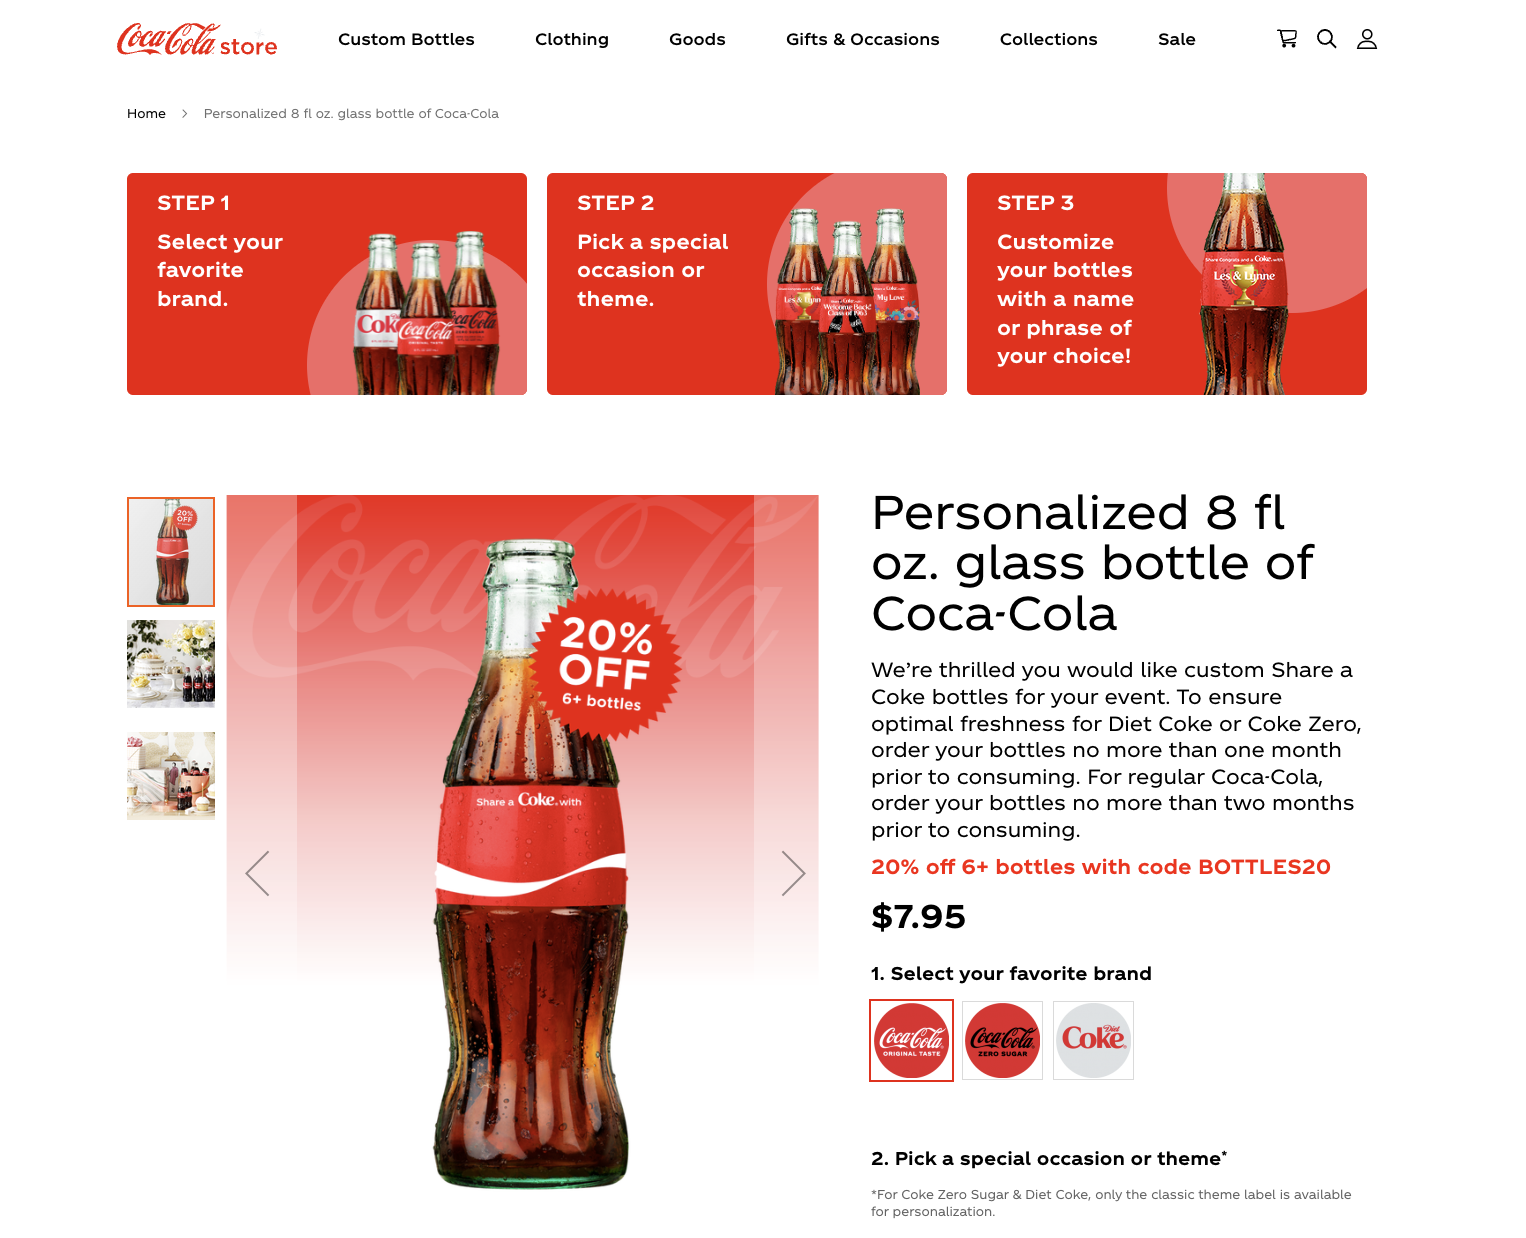 Coca-Cola is tapping the potential of marketing and personalization in its Magento online store.